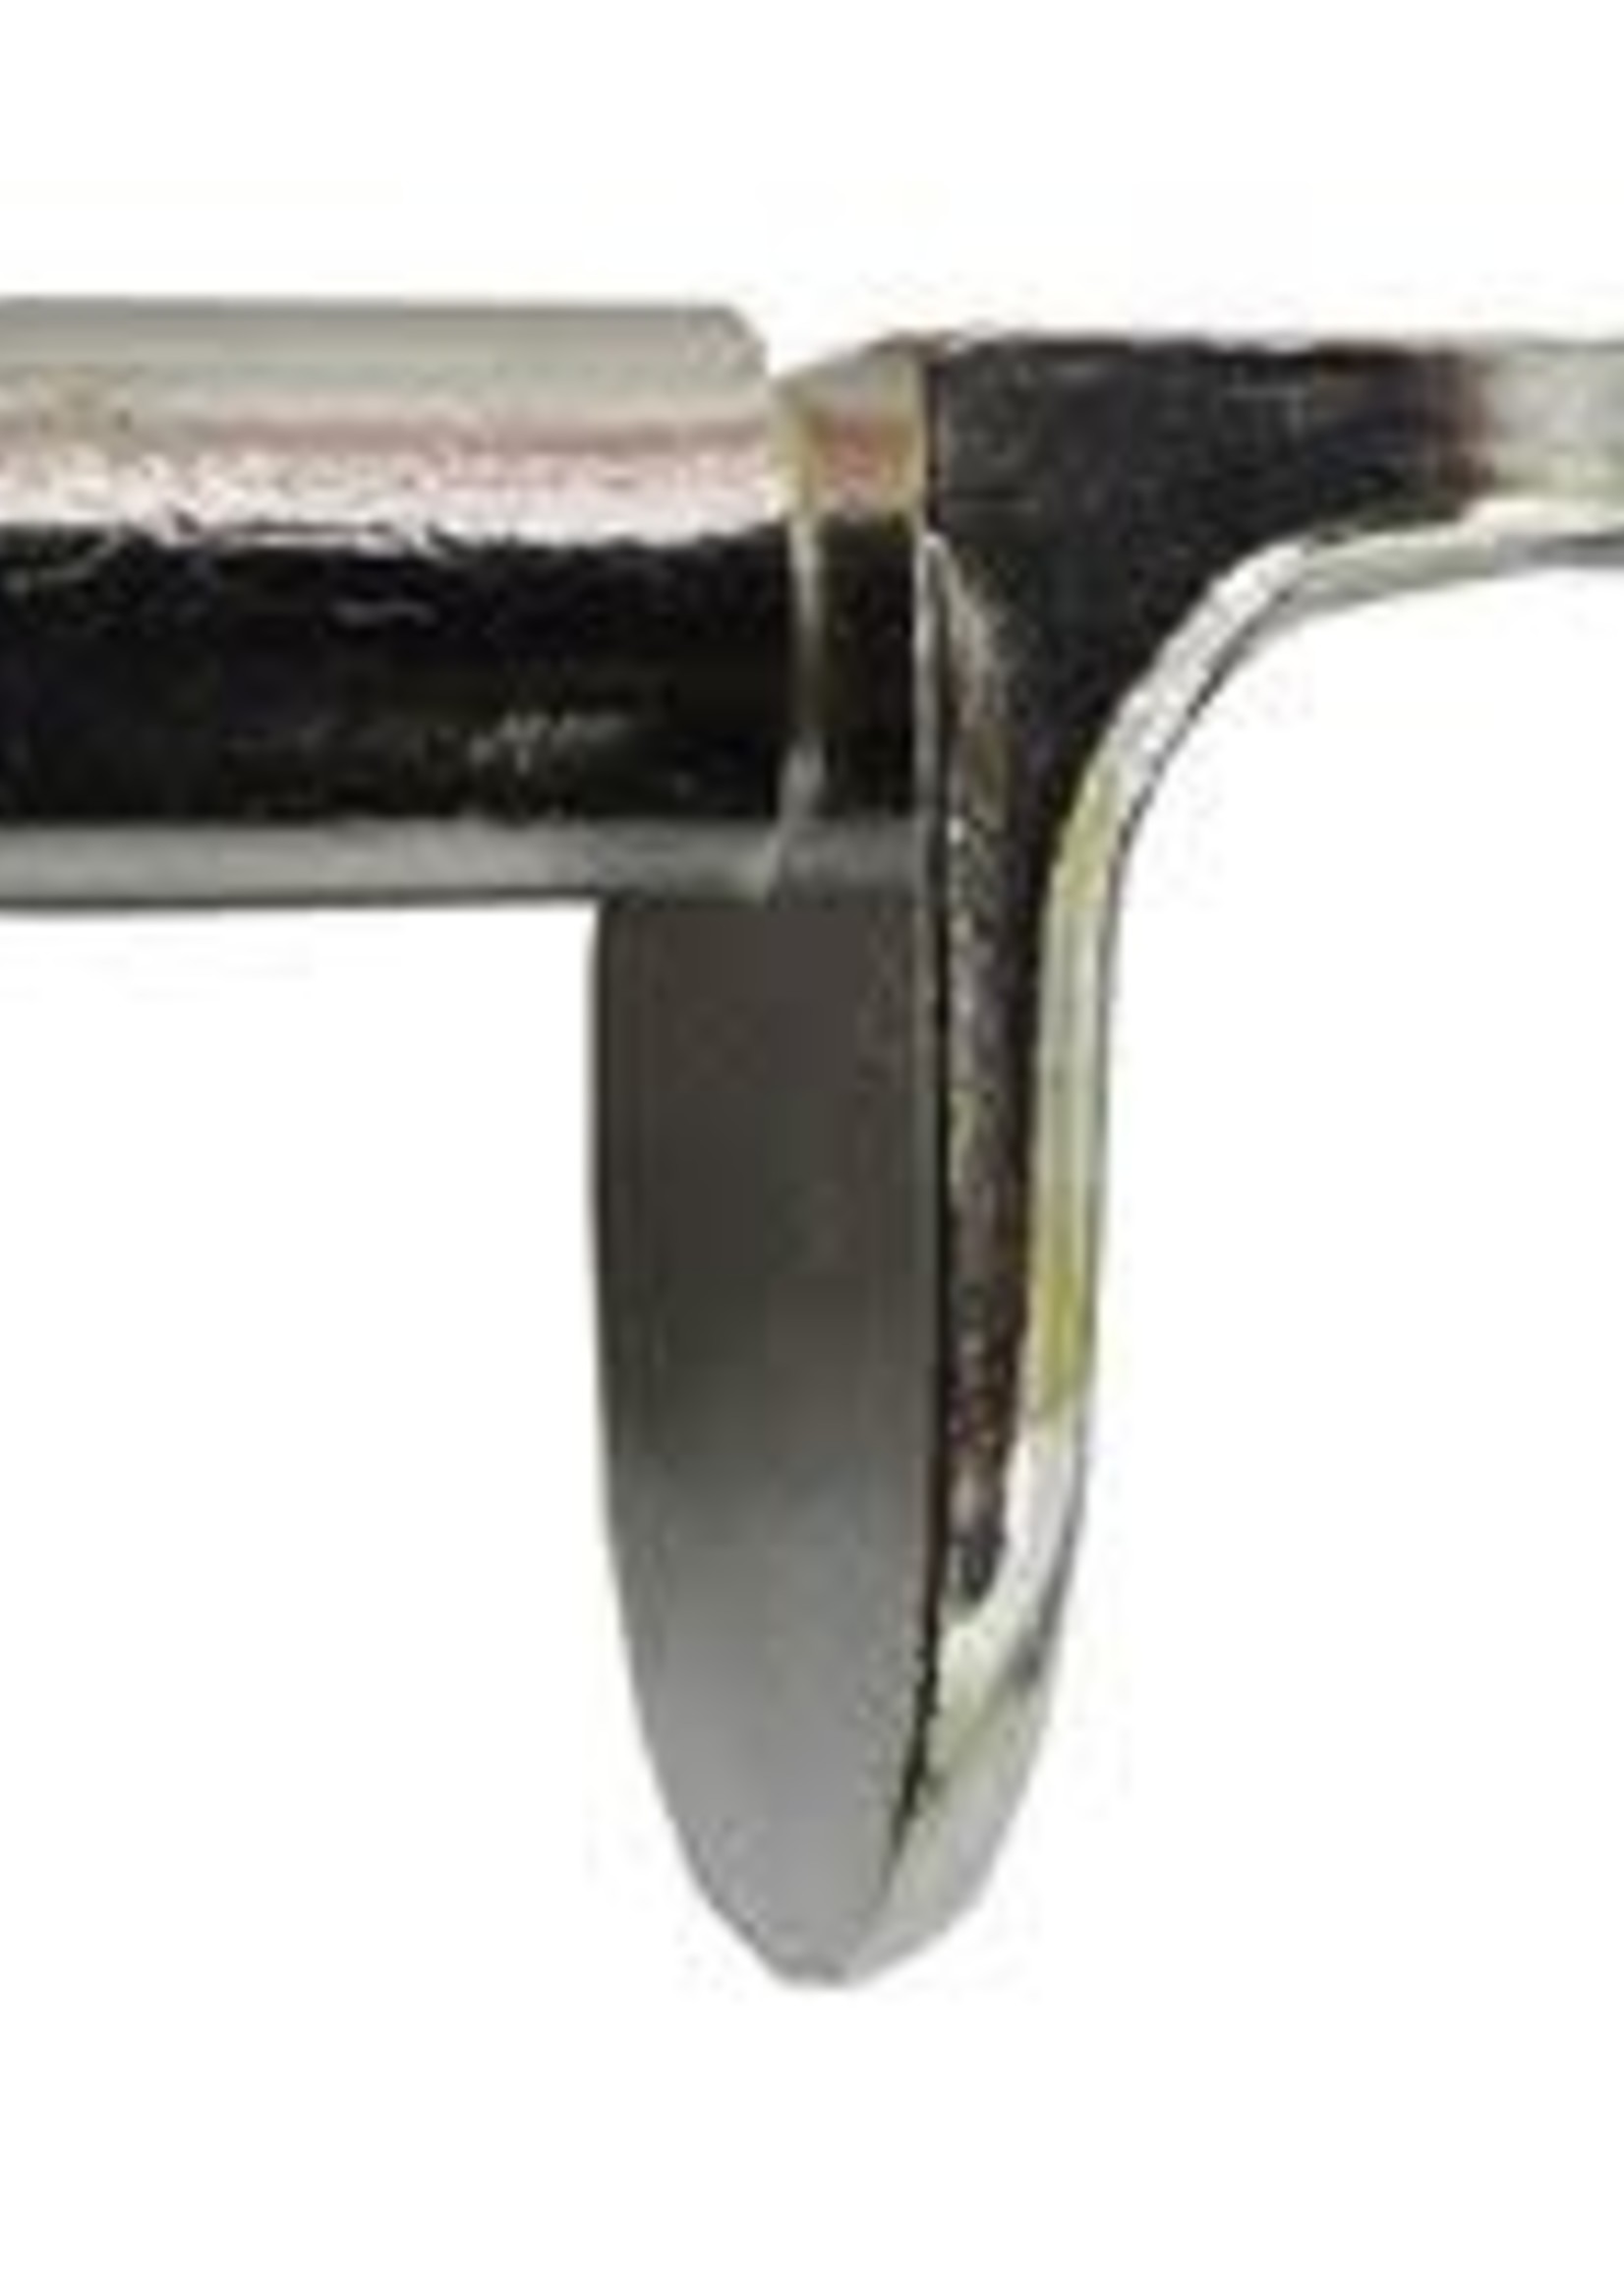 Select Shelf Studs - Push in Nickel Plated PK6 BB71A